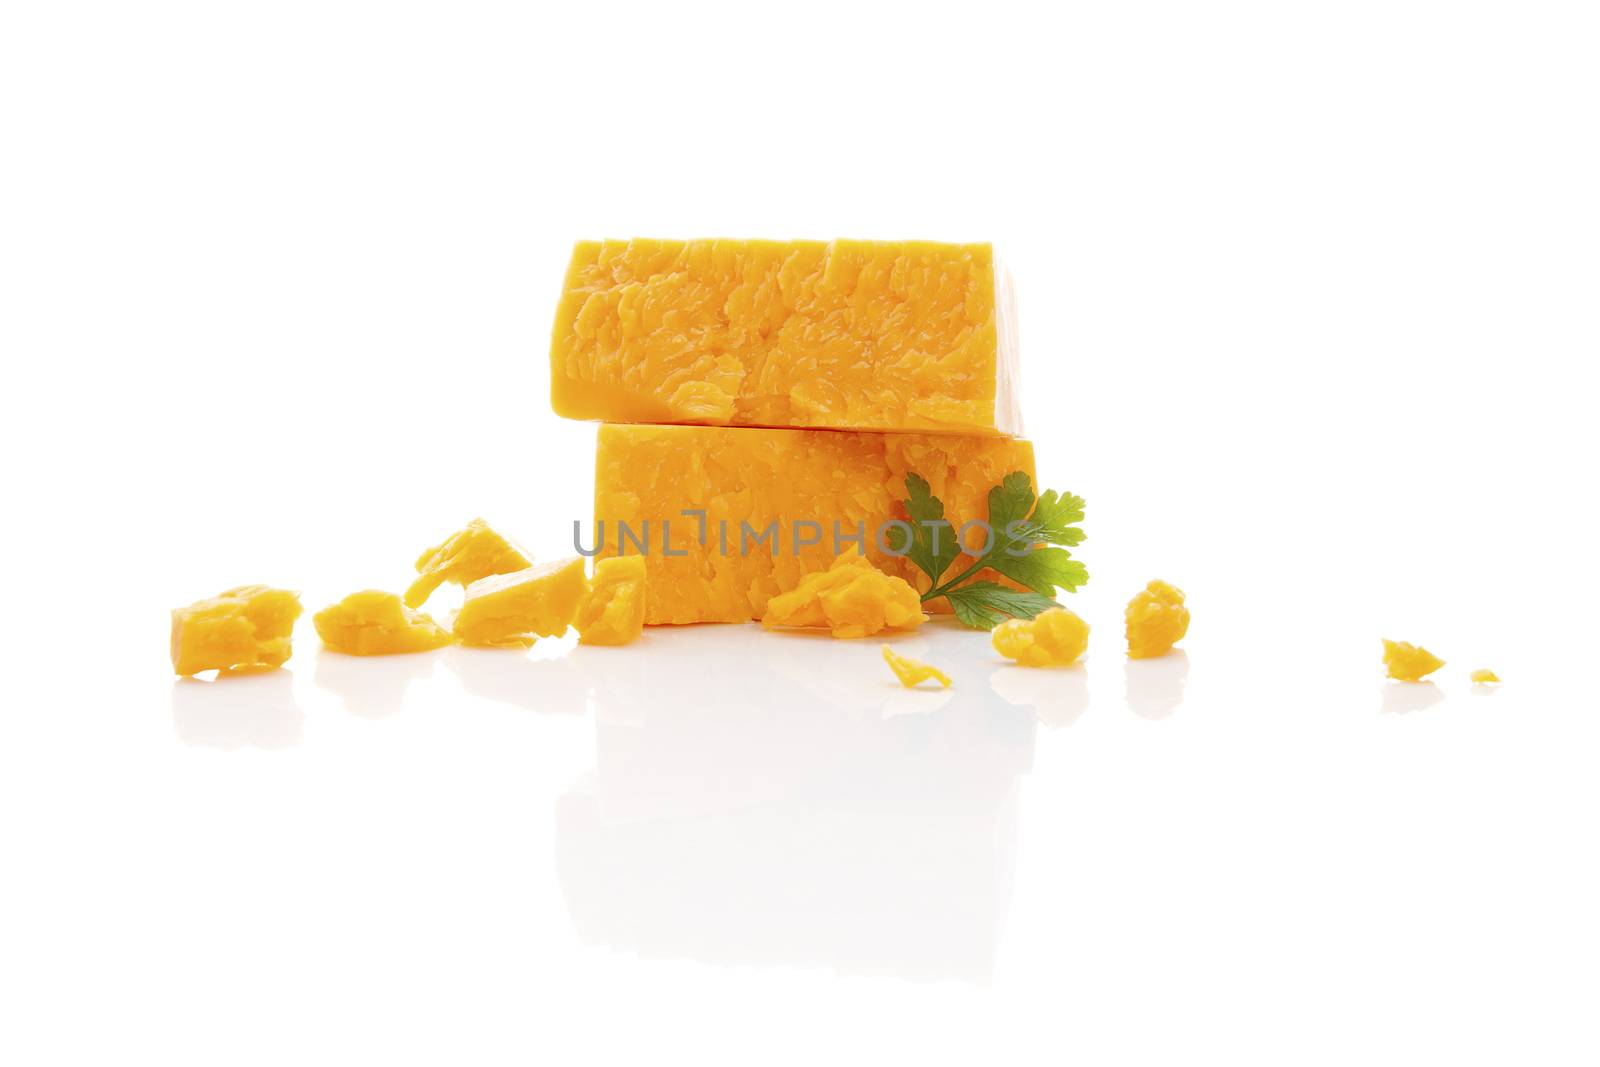 Delicious cheddar cheese. by eskymaks